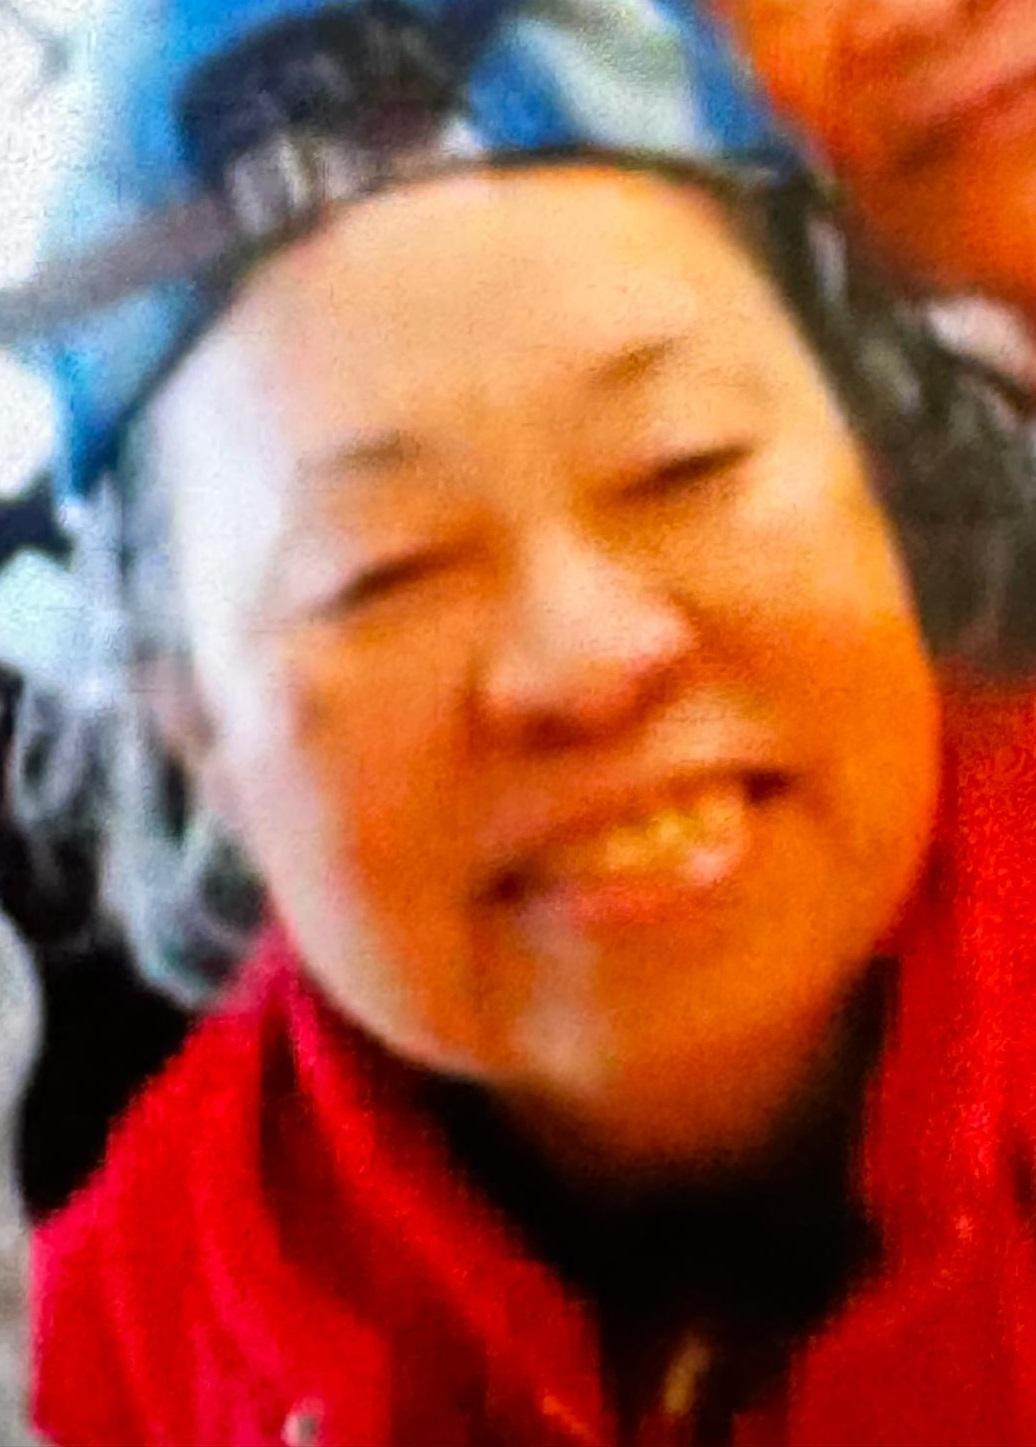 A Thai woman, Chui Sopis, aged 75, is about 1.57 metres tall, 60 kilograms in weight and of fat build. She has a round face with yellow complexion and short black and white hair. She was last seen wearing a pink jacket, black trousers and white slippers.